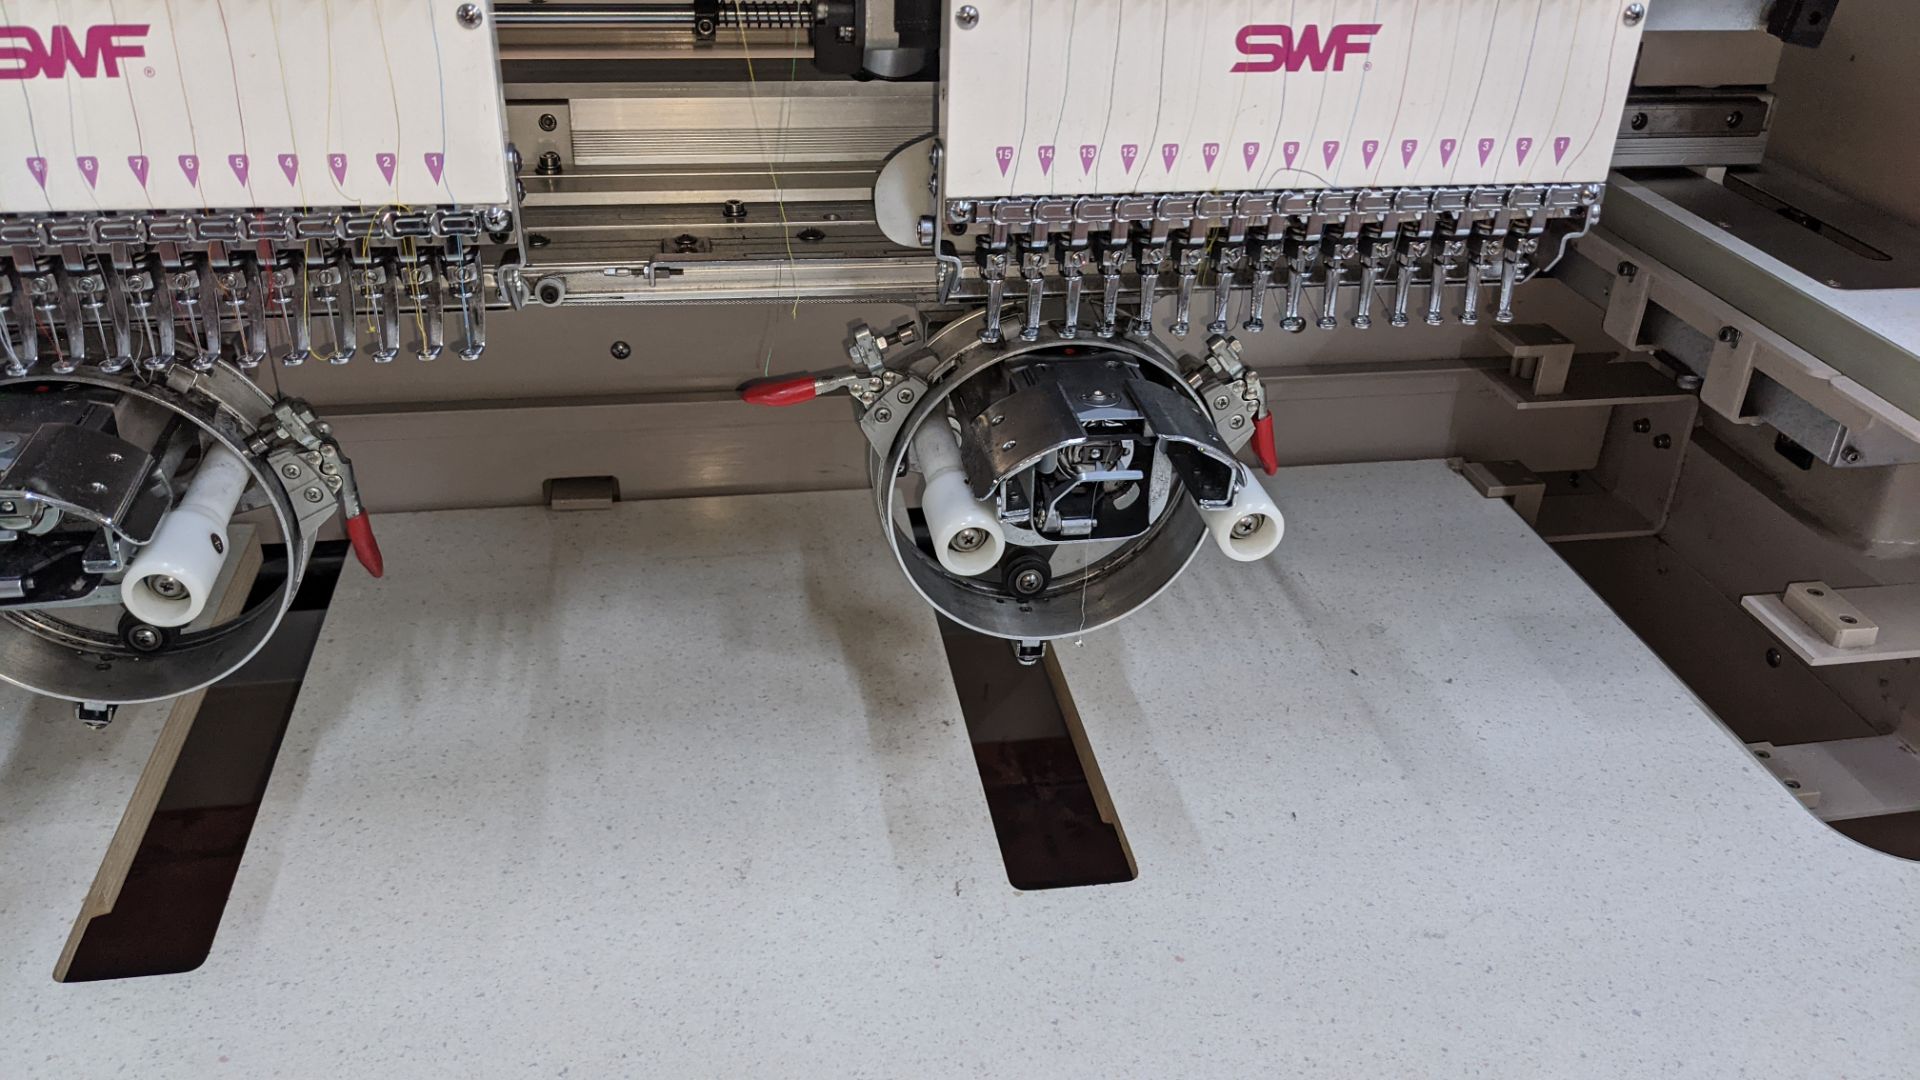 Sunstar Precision Co SWF dual function 6-head automatic embroidery machine, model SWF/HC-UH1506D-45. - Image 45 of 60